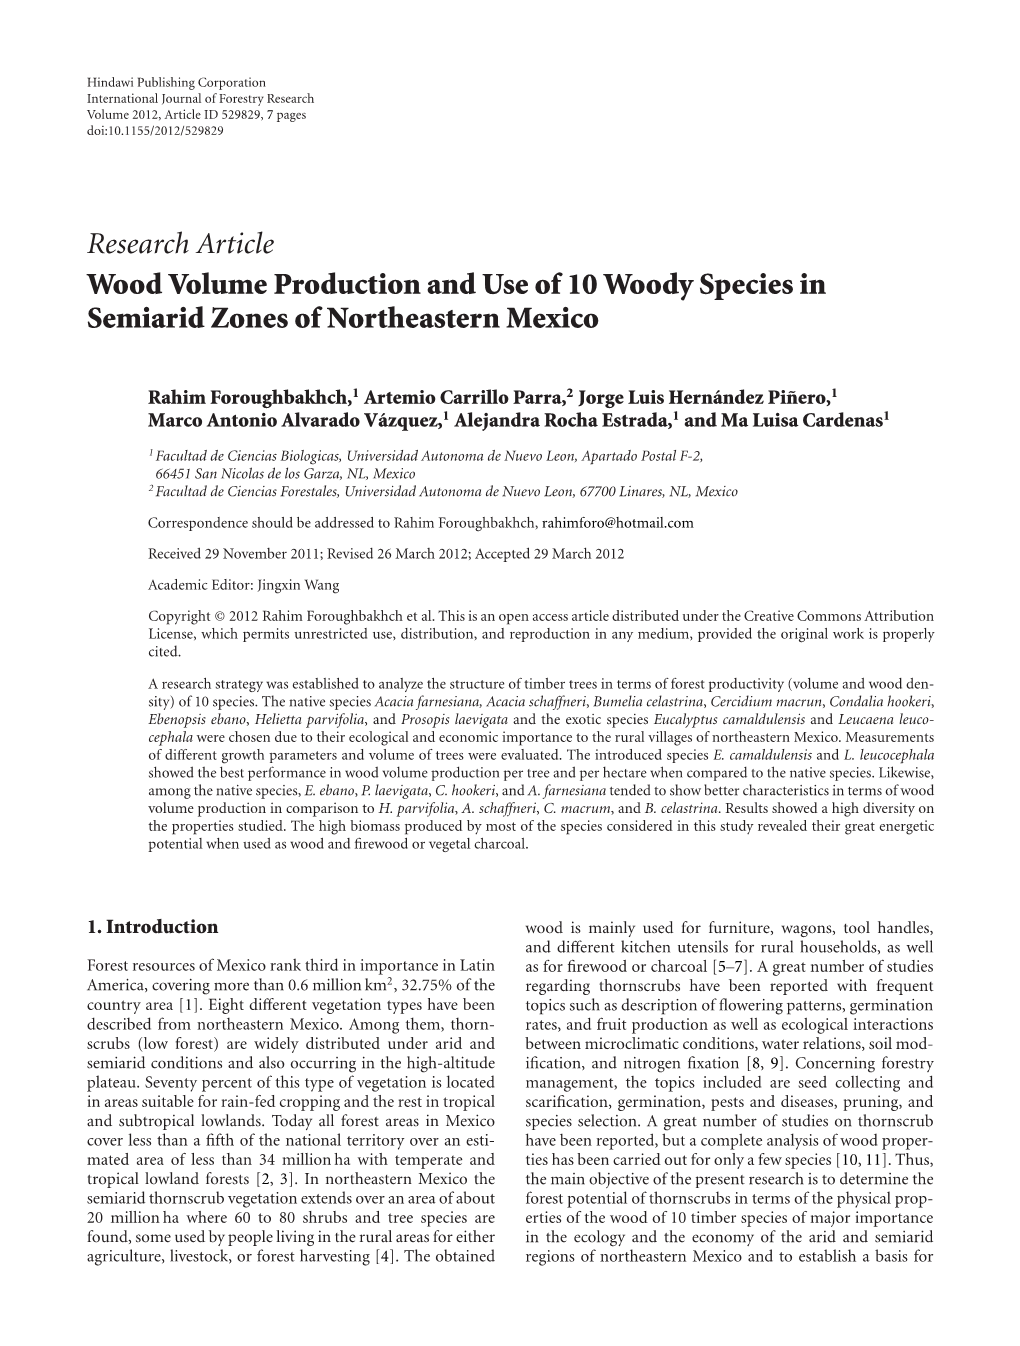 Research Article Wood Volume Production and Use of 10 Woody Species in Semiarid Zones of Northeastern Mexico